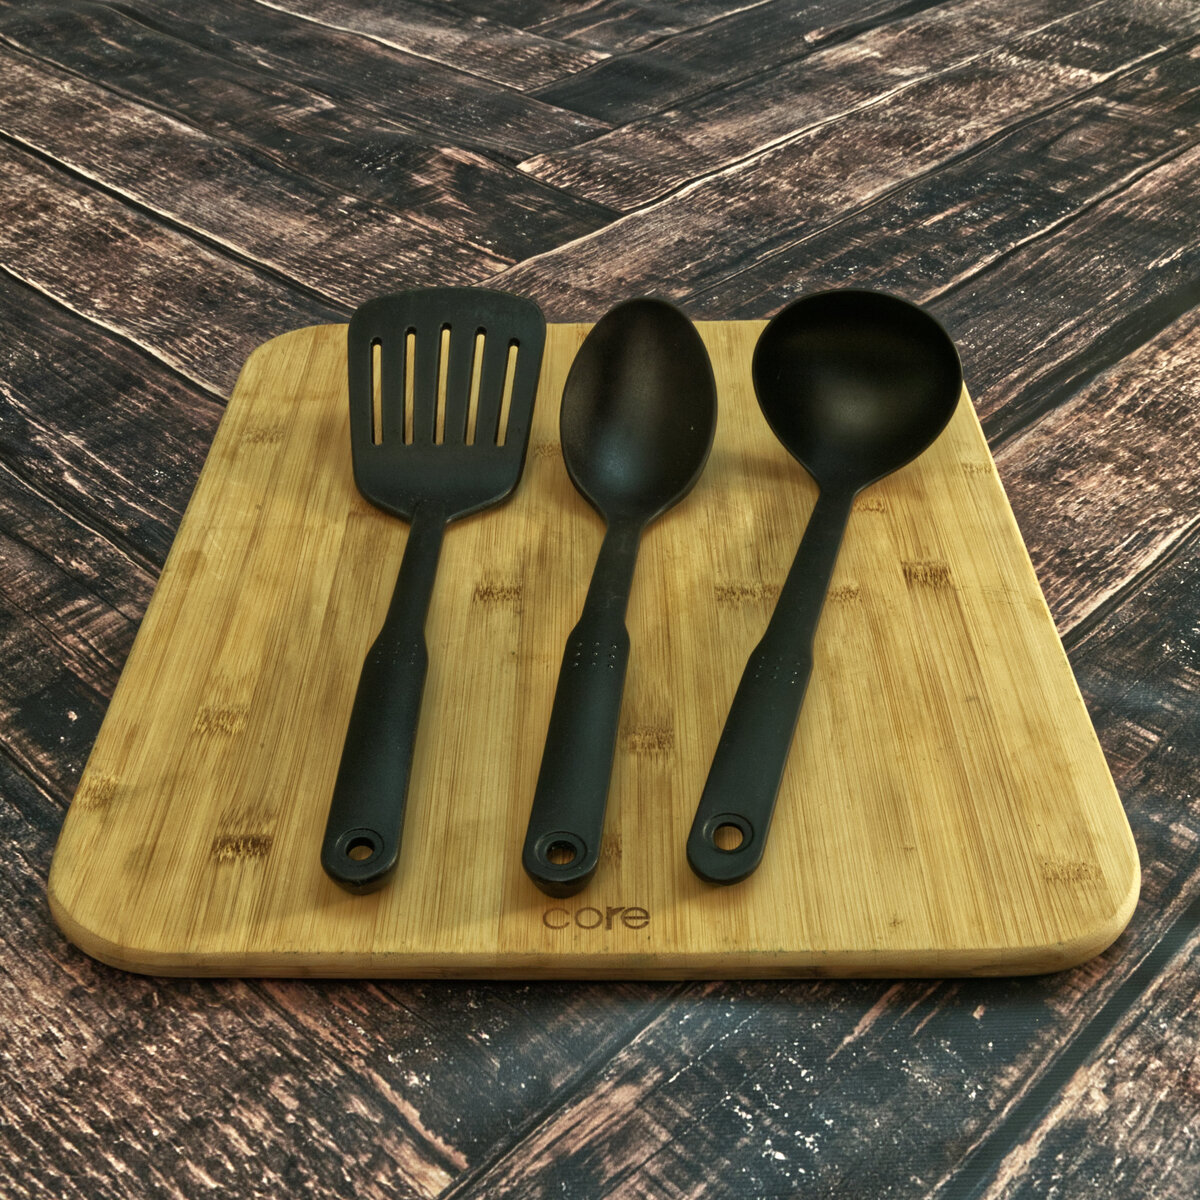 Cooking Utensils (Slotted Spatula, Cooking Spoon and Ladle)